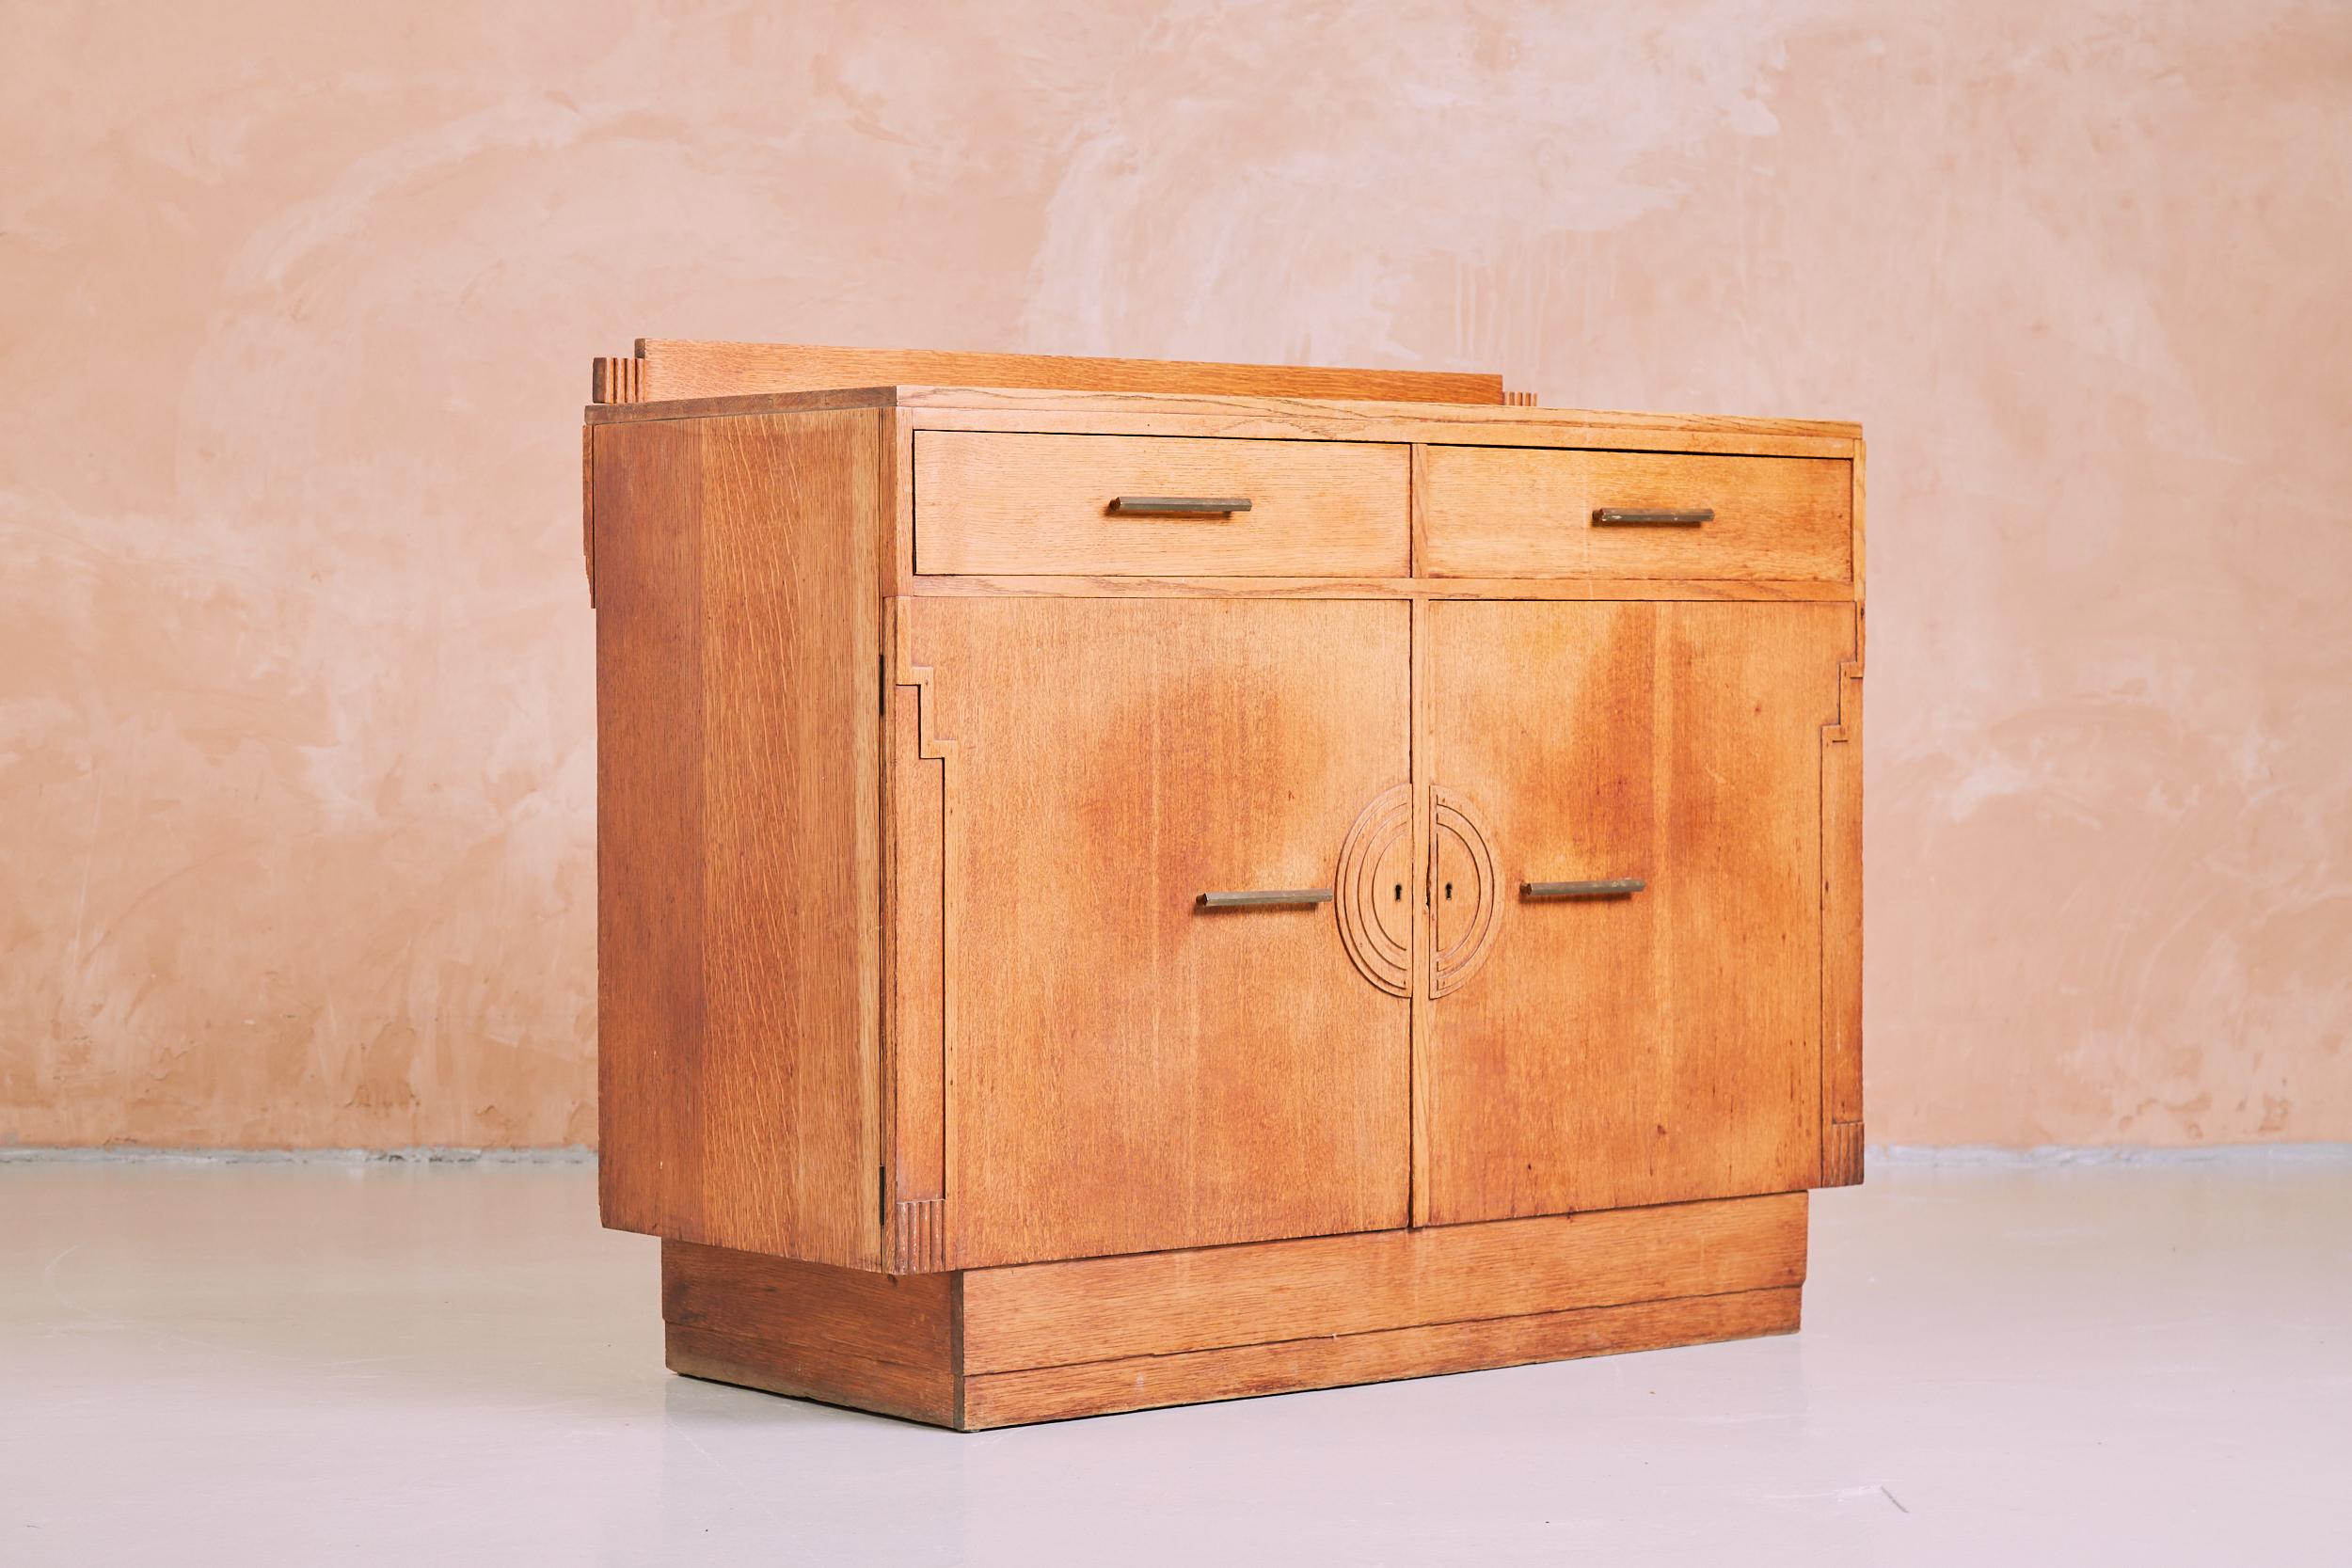 An Art Deco sideboard constructed in solid oak from circa 1930. A rare piece from an era of cabinet making that combined craftsmanship with elegant design. A minimal Art Deco aesthetic with quintessential accents on the cupboard doors, on the rear